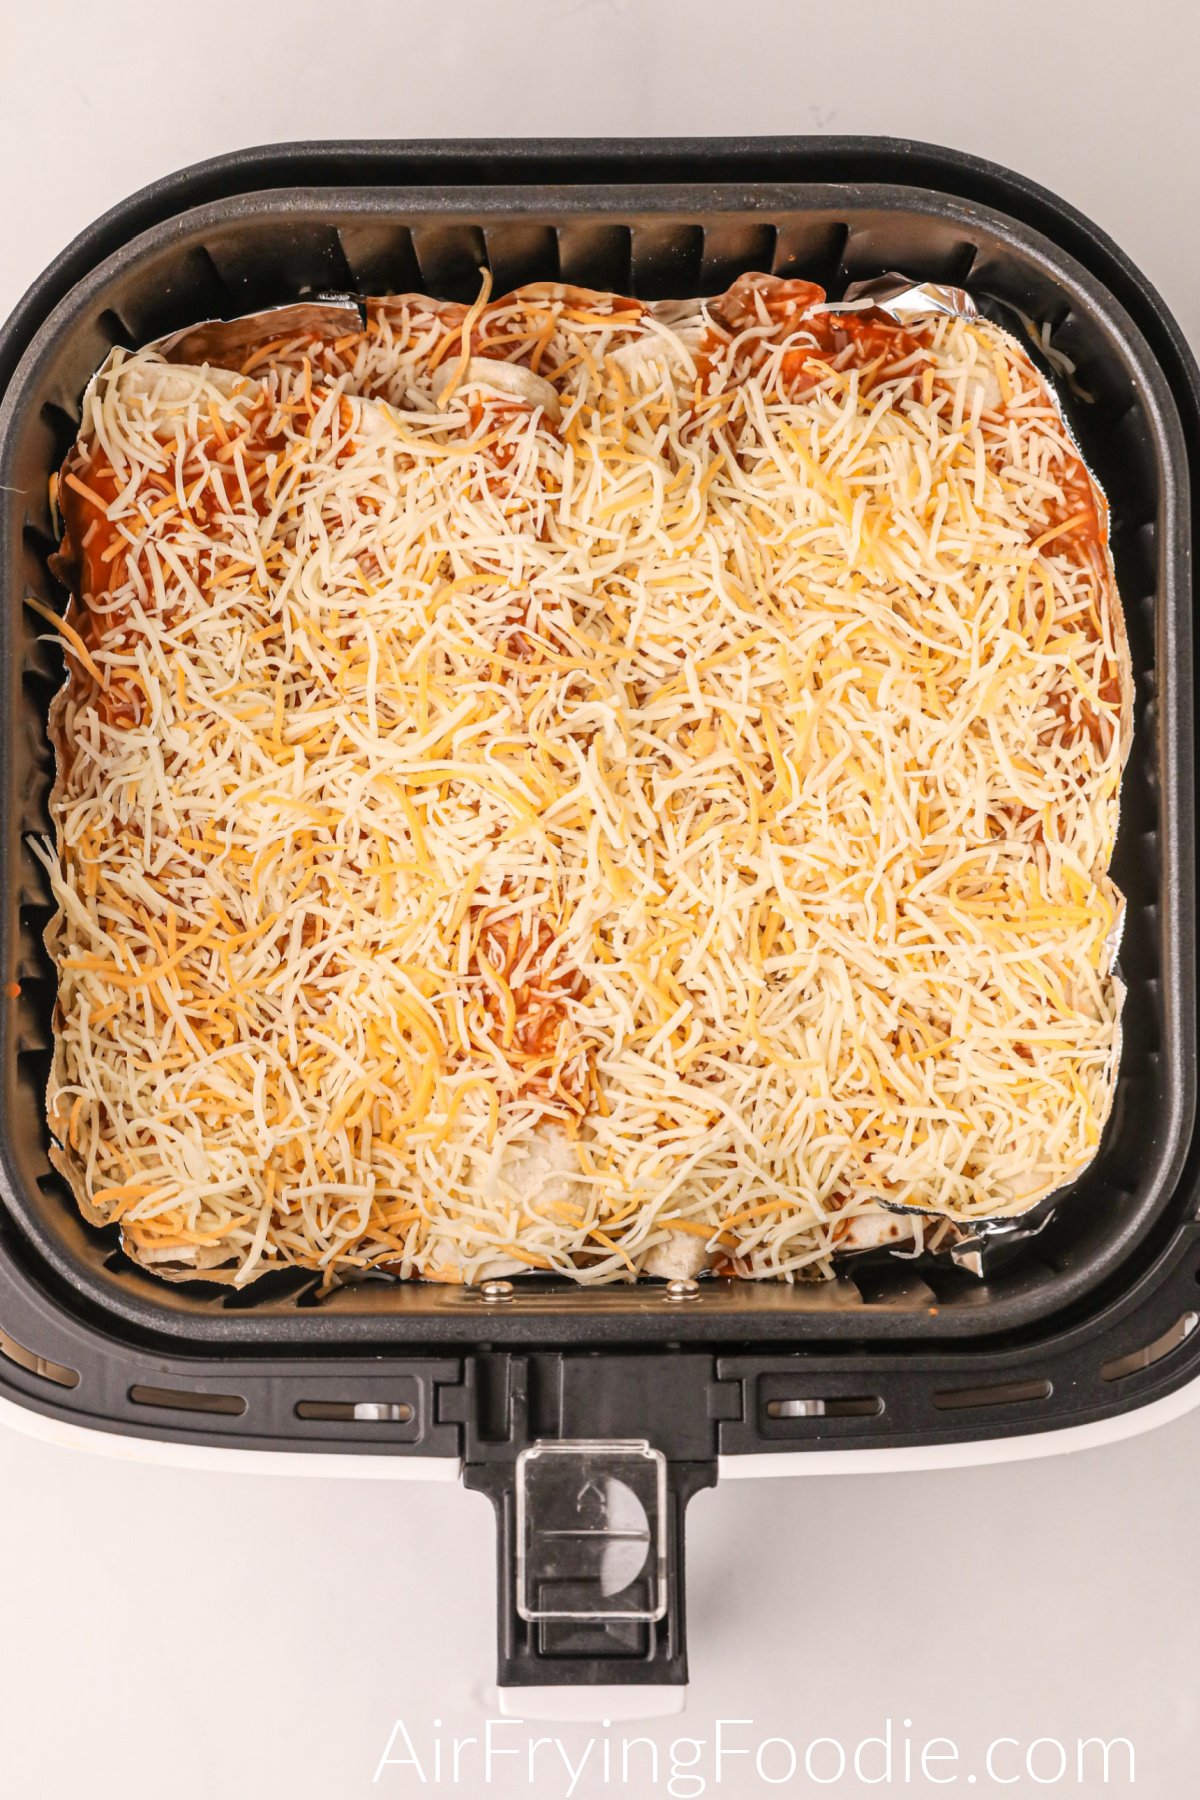 Enchiladas rolled into the bottom of the air fryer basket and topped with sauce and cheese, ready to air fry.